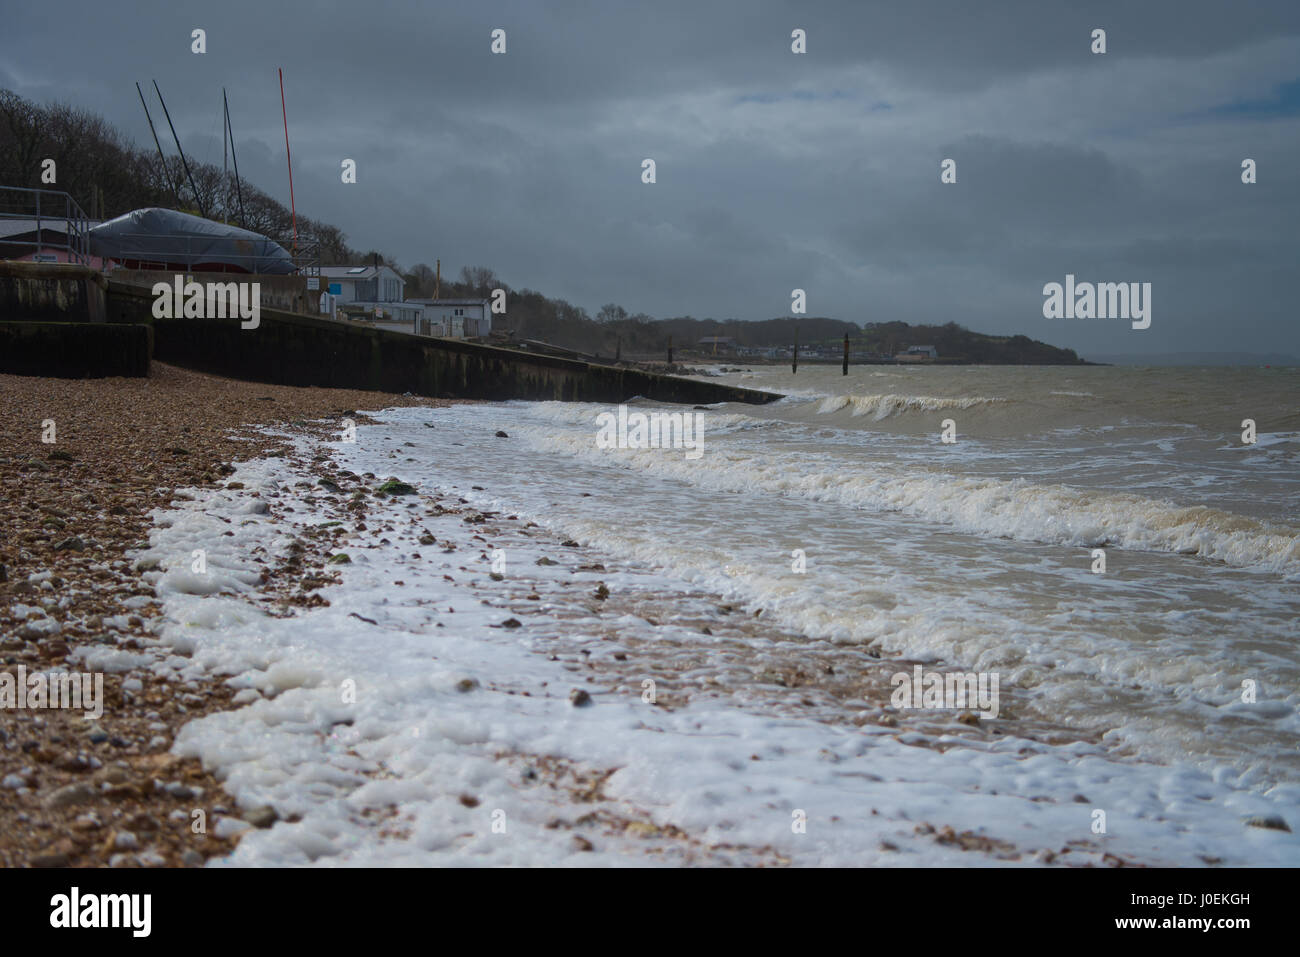 Stormy sea conditions with foam water and overcast sky, beach view with stones, a slipway, views of dinghy masts, distant buildings in bay. Stock Photo